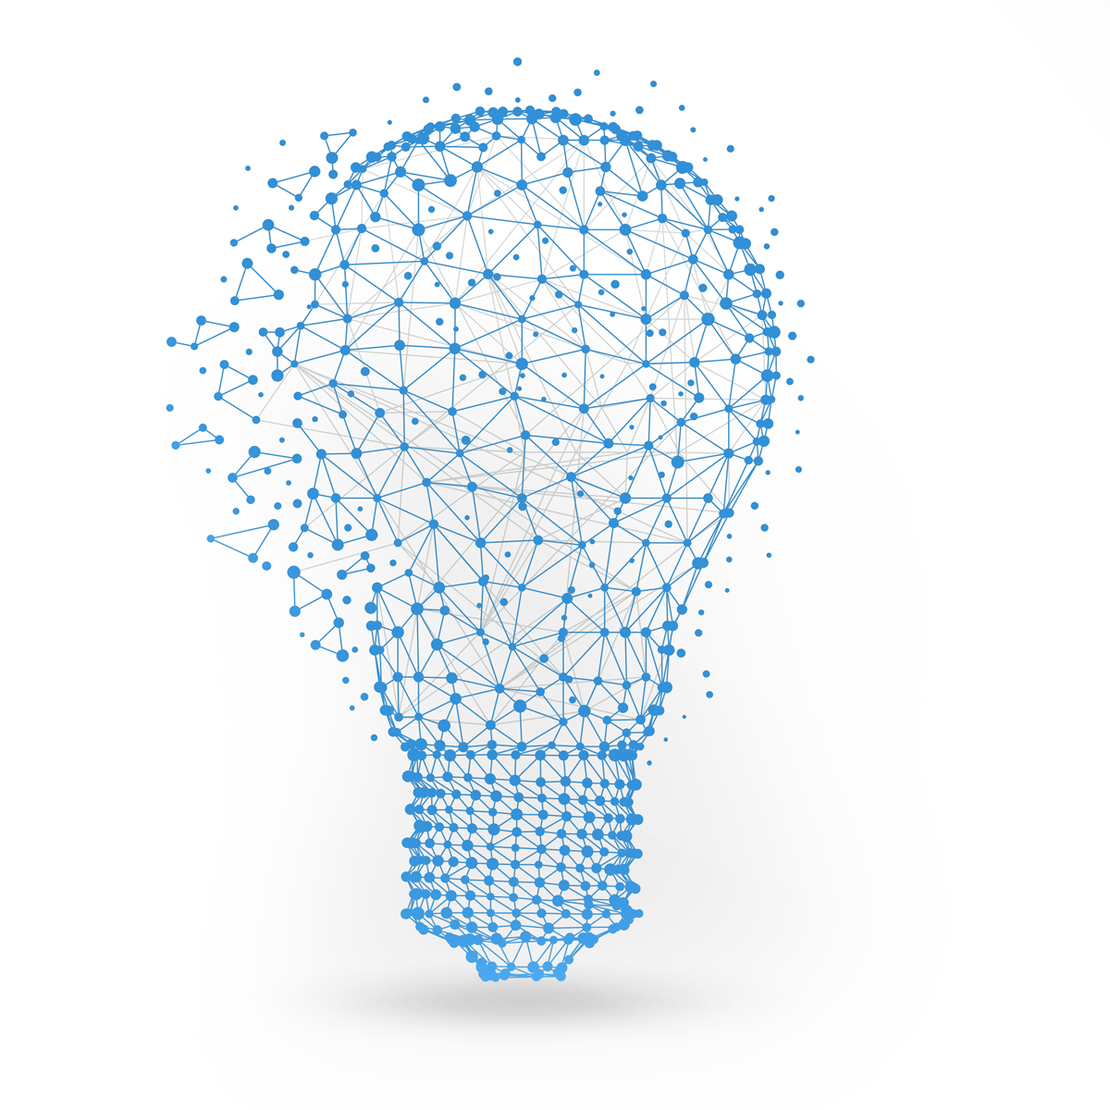 Light bulb as a symbol for business intelligence